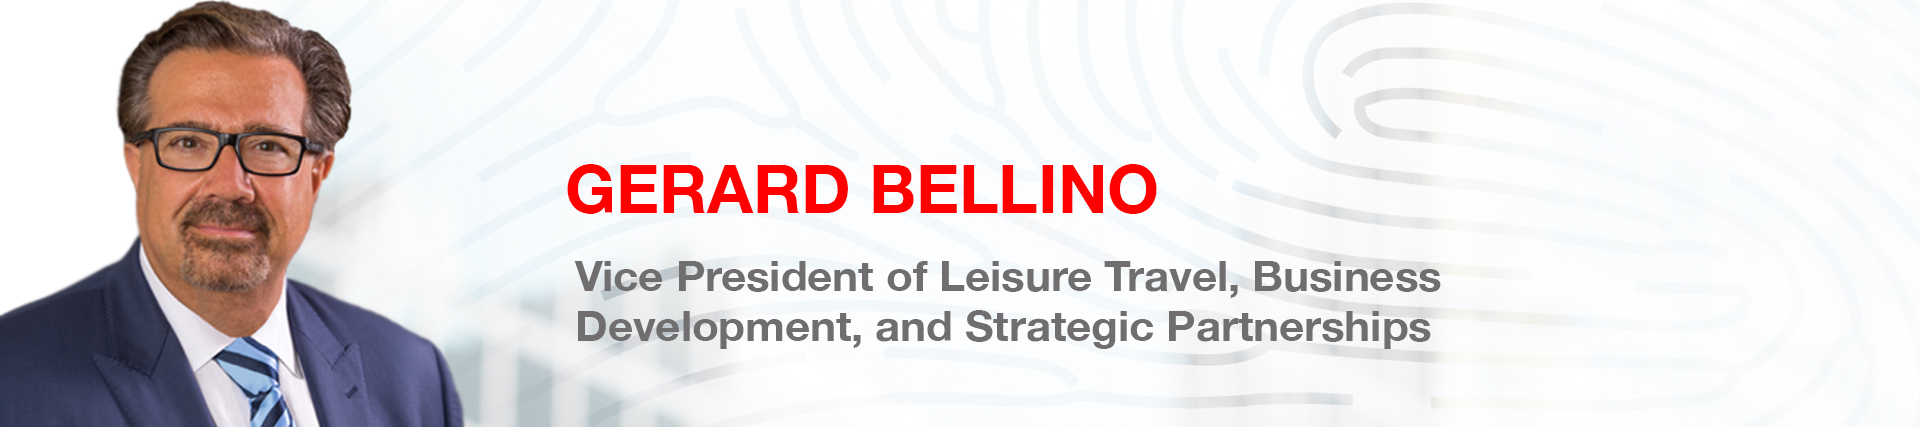 Direct Travel Appoints Gerard Bellino Vice President of Leisure Travel, Business Development, and Strategic Partnerships